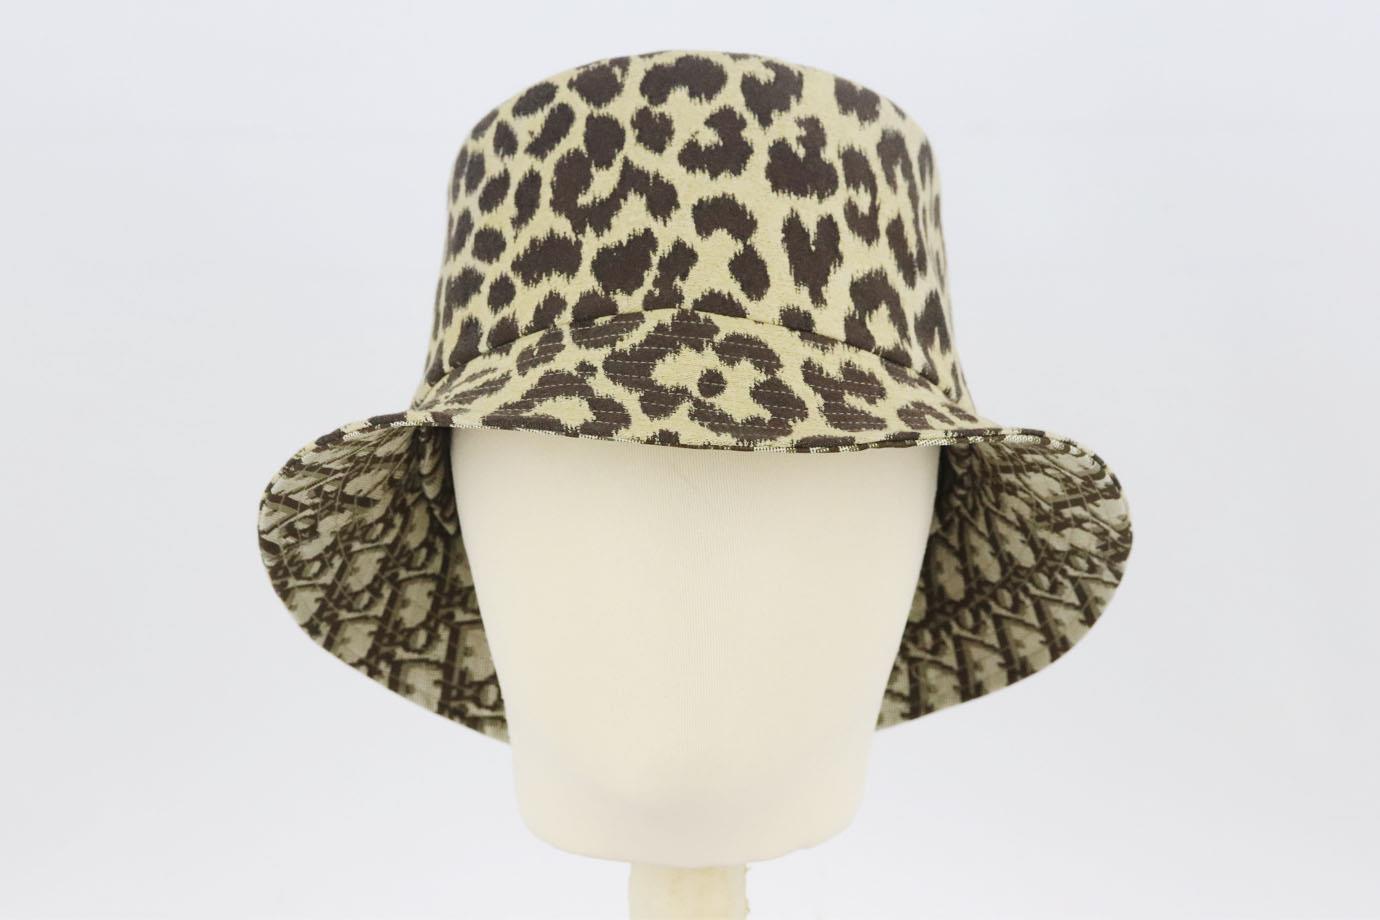 Christian Dior reversible leopard and oblique printed cotton bucket hat. Tonal-brown. Slips on. 46% Cotton, 46% polyester, 8% polyurethane; lining: 46% cotton, 46% polyester, 8% polyurethane. Does not come with dustbag or box. Size: Medium (57 cm).